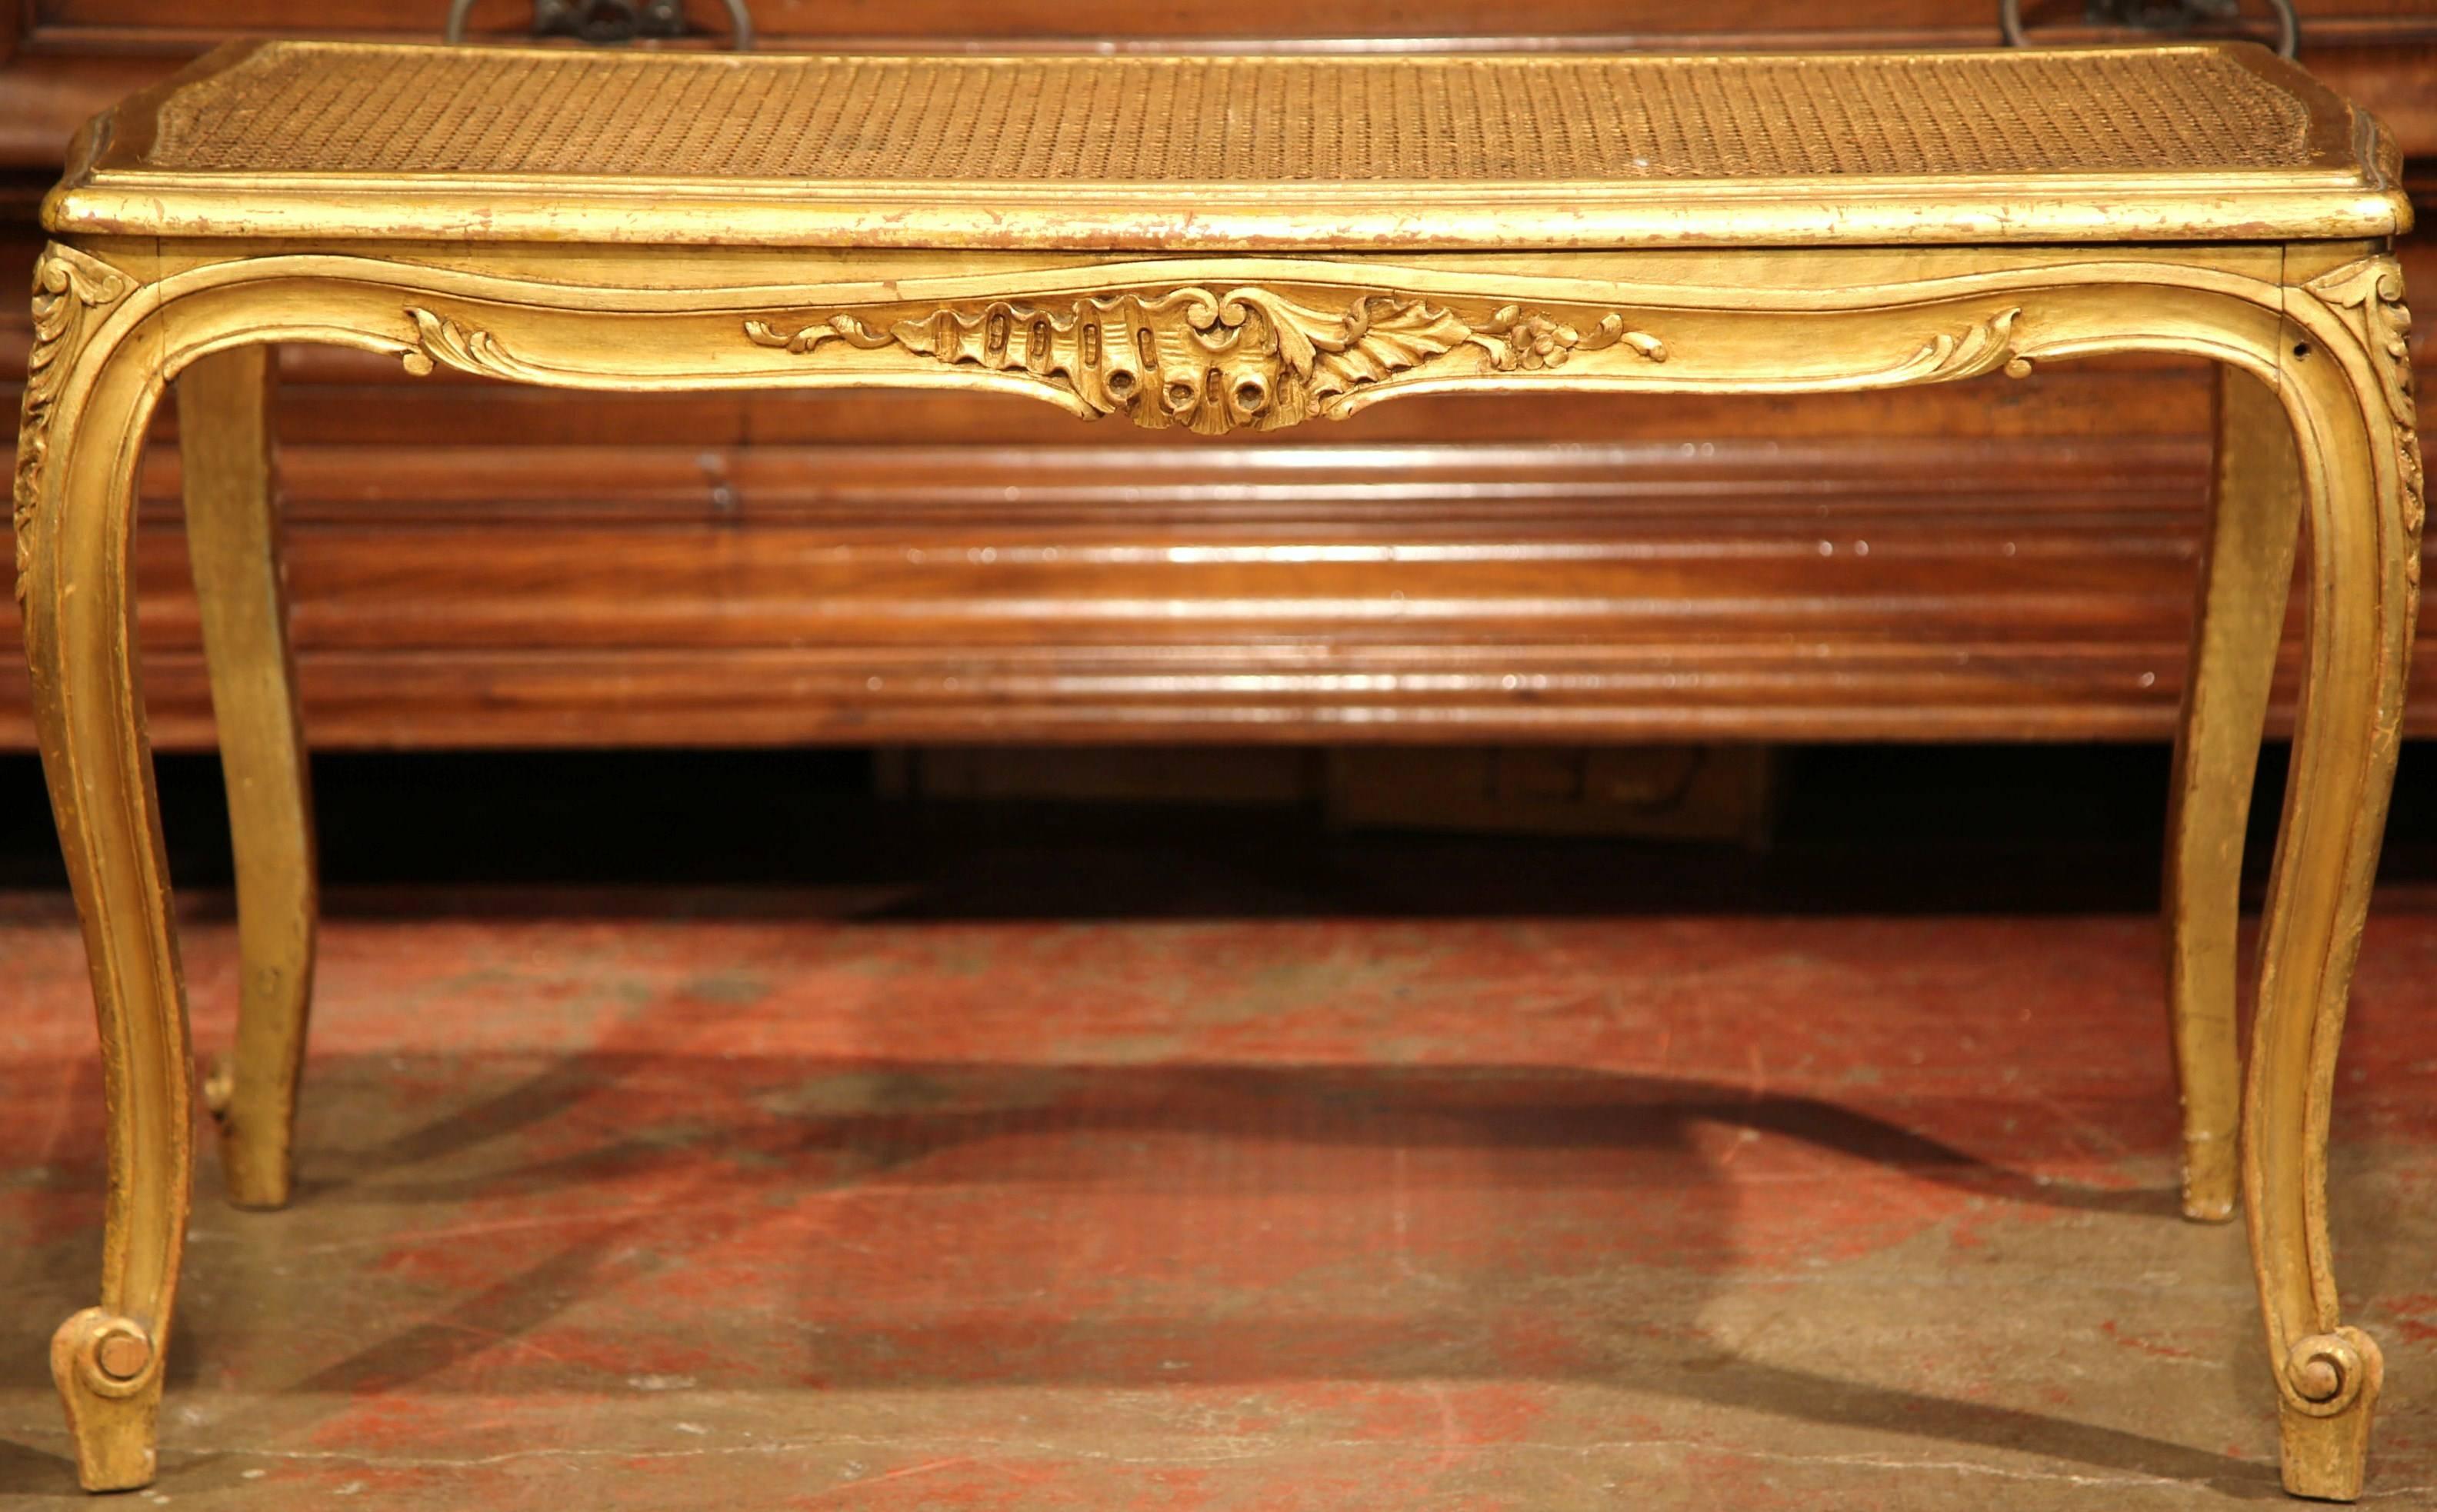 This elegant, hand carved giltwood bench was created in France, circa 1880. The antique piano seat seats on cabriole legs embellished with delicate, Louis XV carvings on the apron, and a cane seat also gilded on top. The bench is in excellent